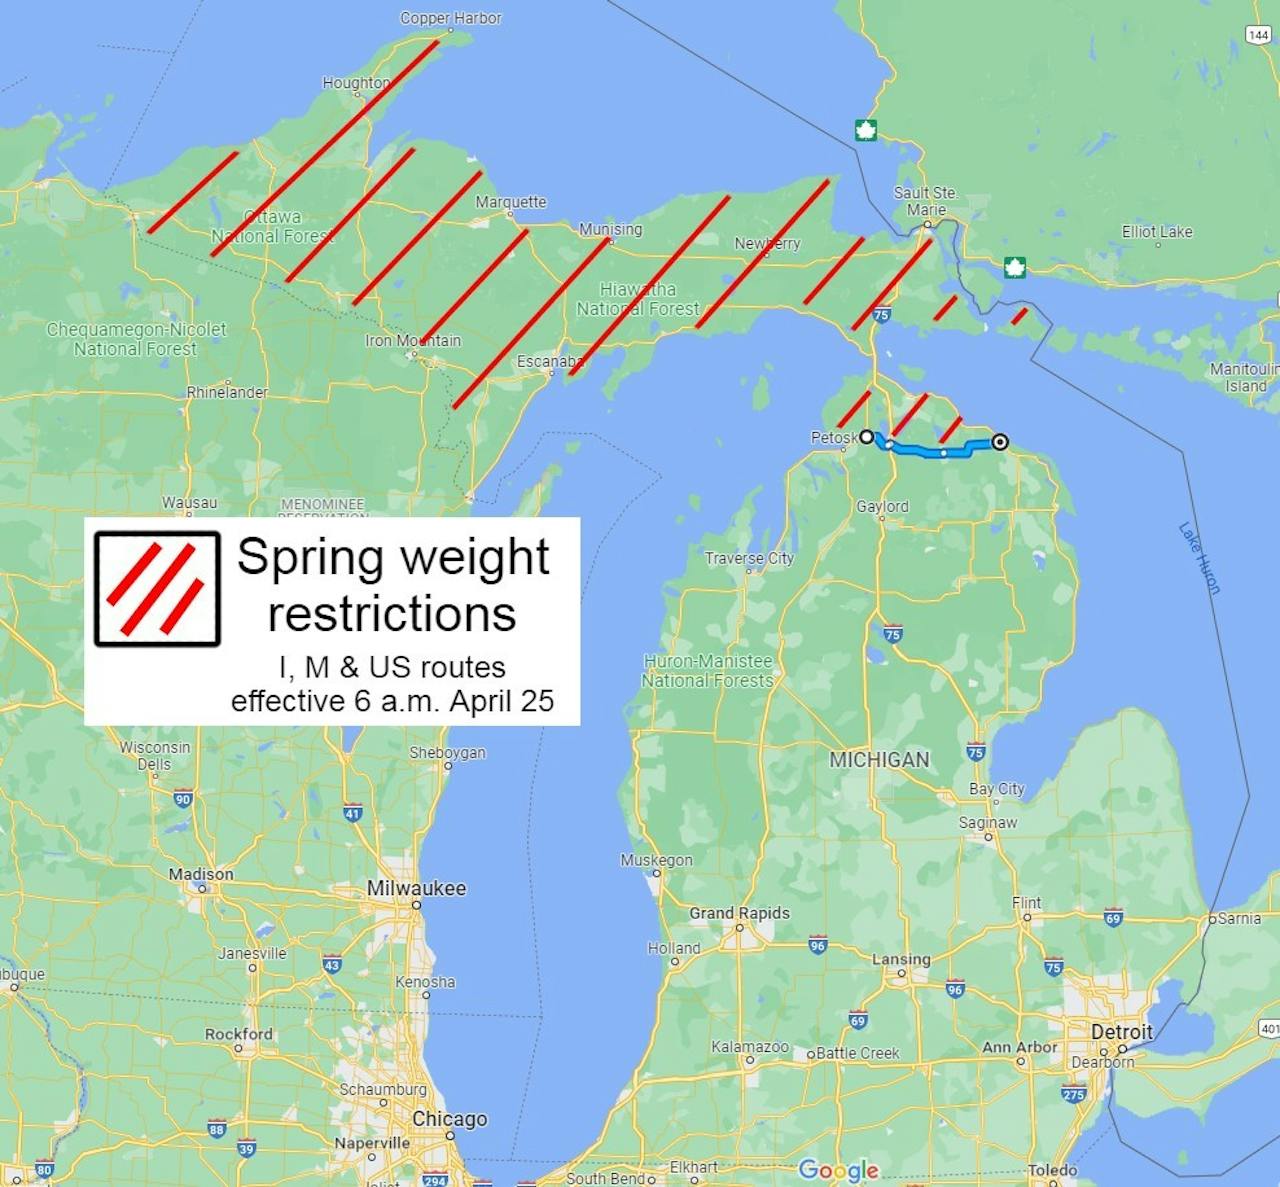 Only Michigan's Upper Peninsula and part of the southern part of the state still have spring weight restrictions in place.